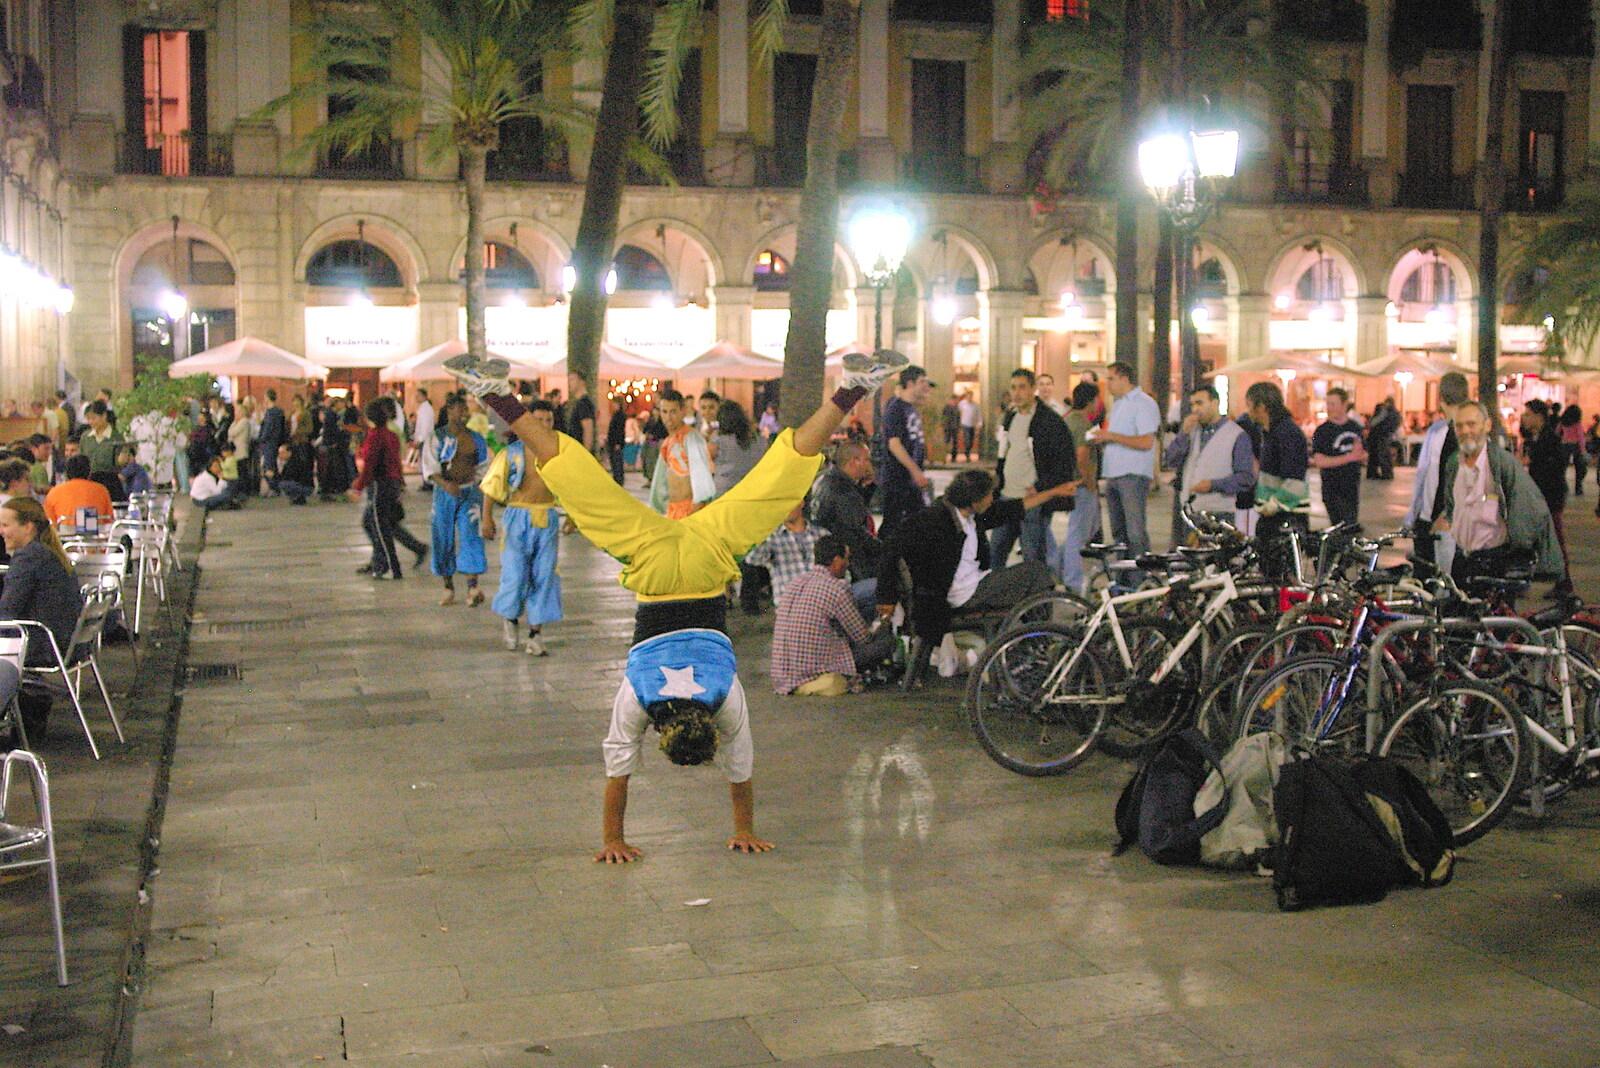 More acrobatics from A Trip to Barcelona, Catalunya, Spain - 29th April 2005